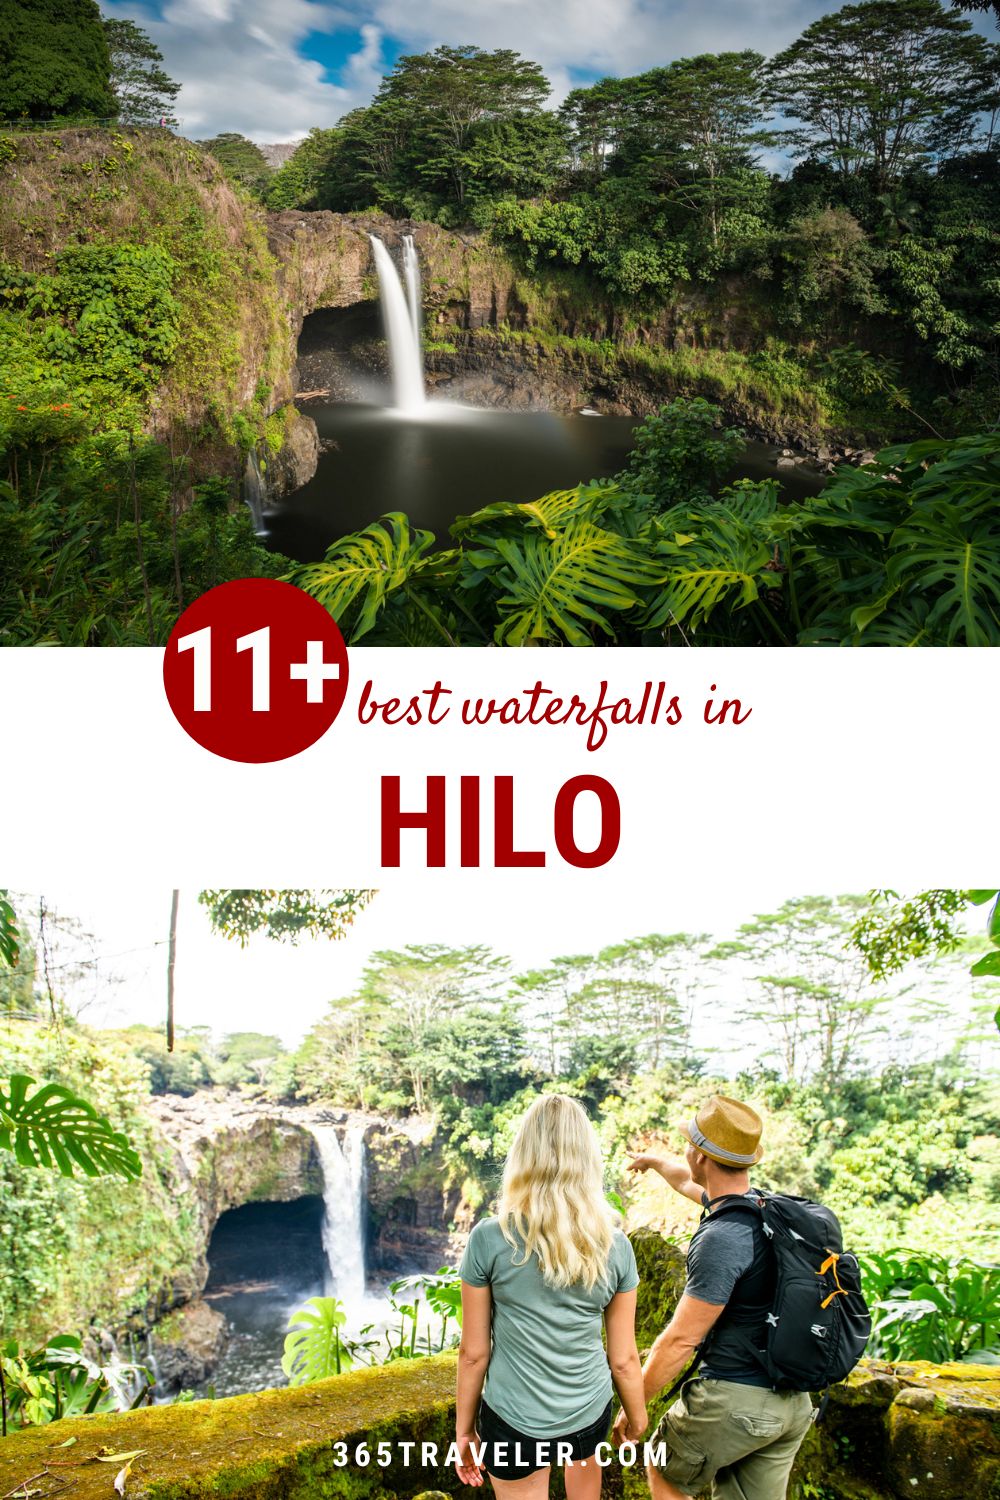 11+ BEST HILO WATERFALLS YOU DON'T WANT TO MISS